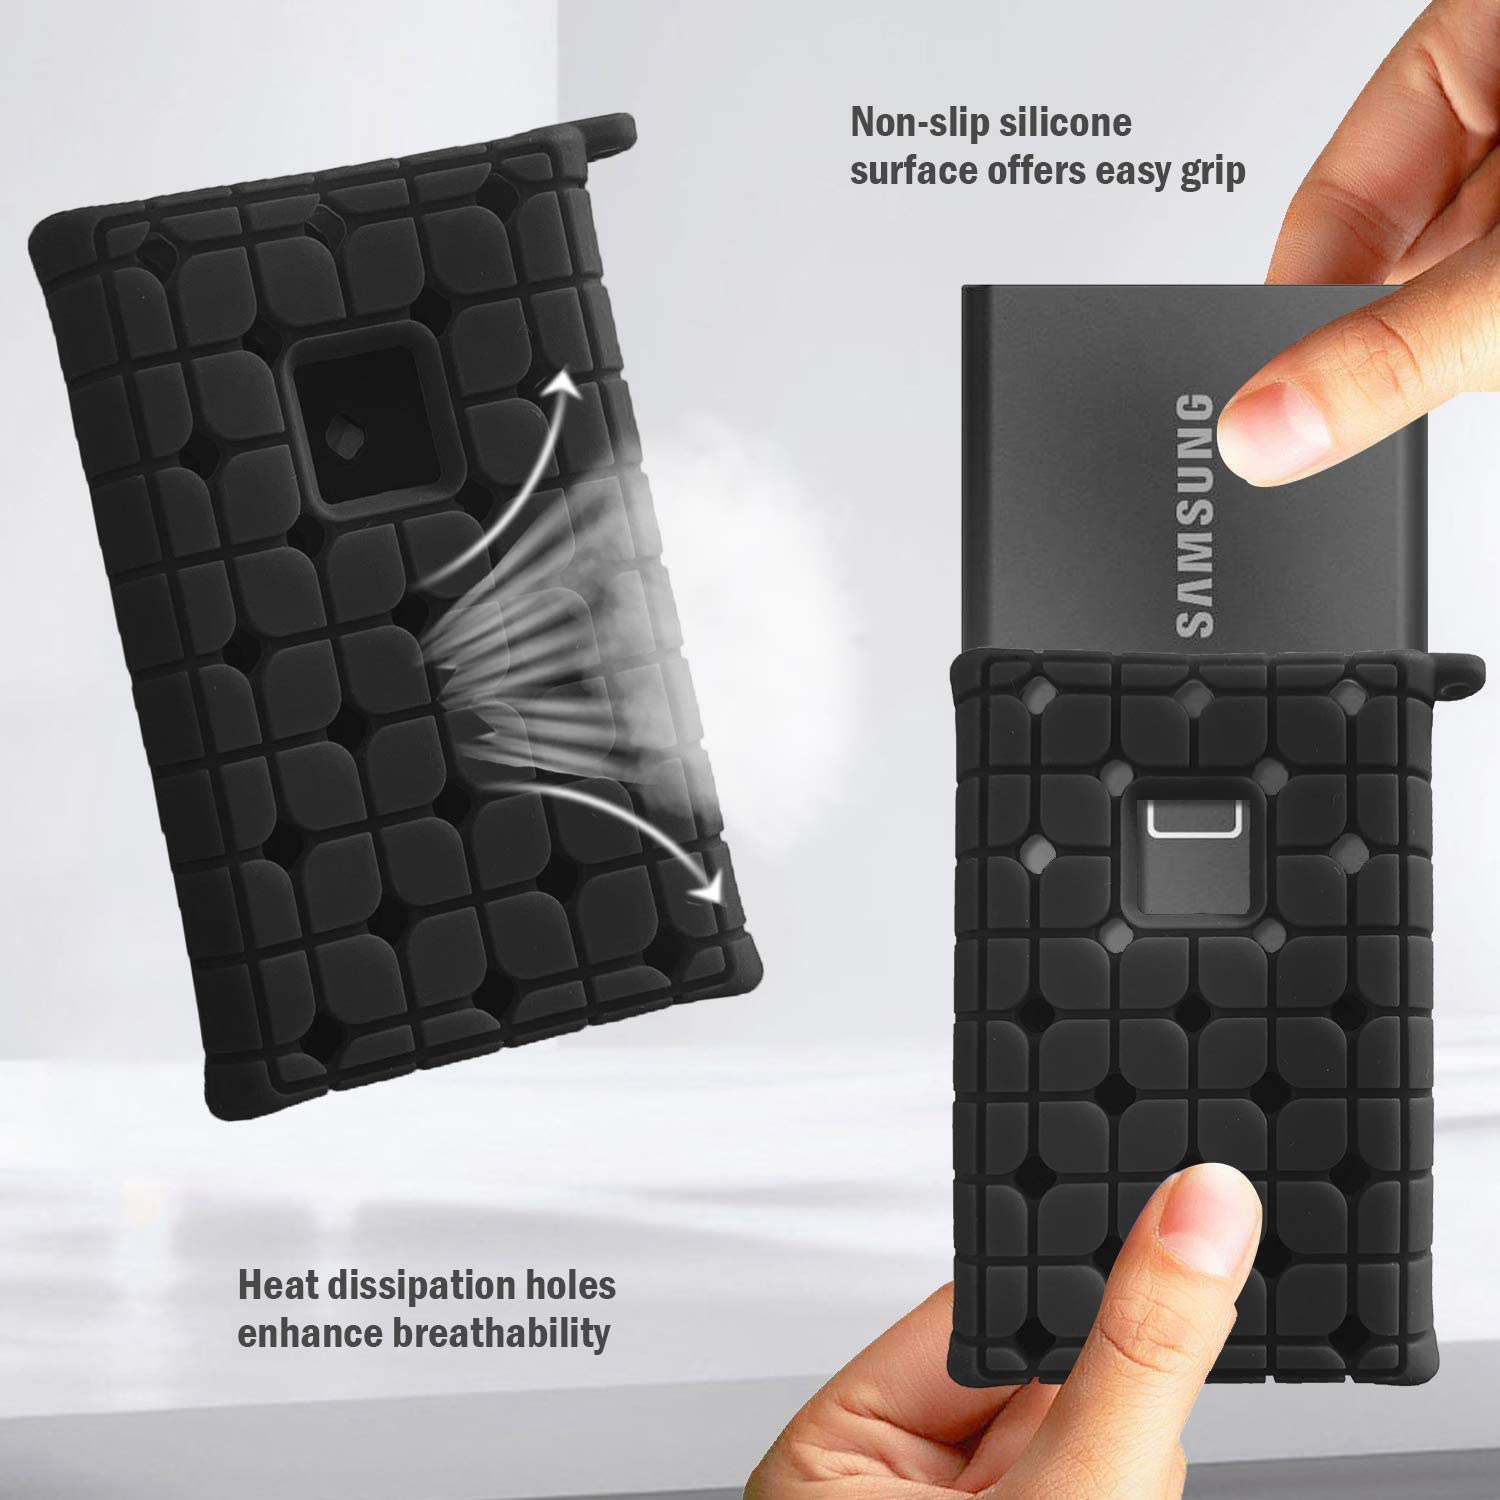 CASE ONLY) Hard Carrying Case with Silicone Cover for Samsung T7